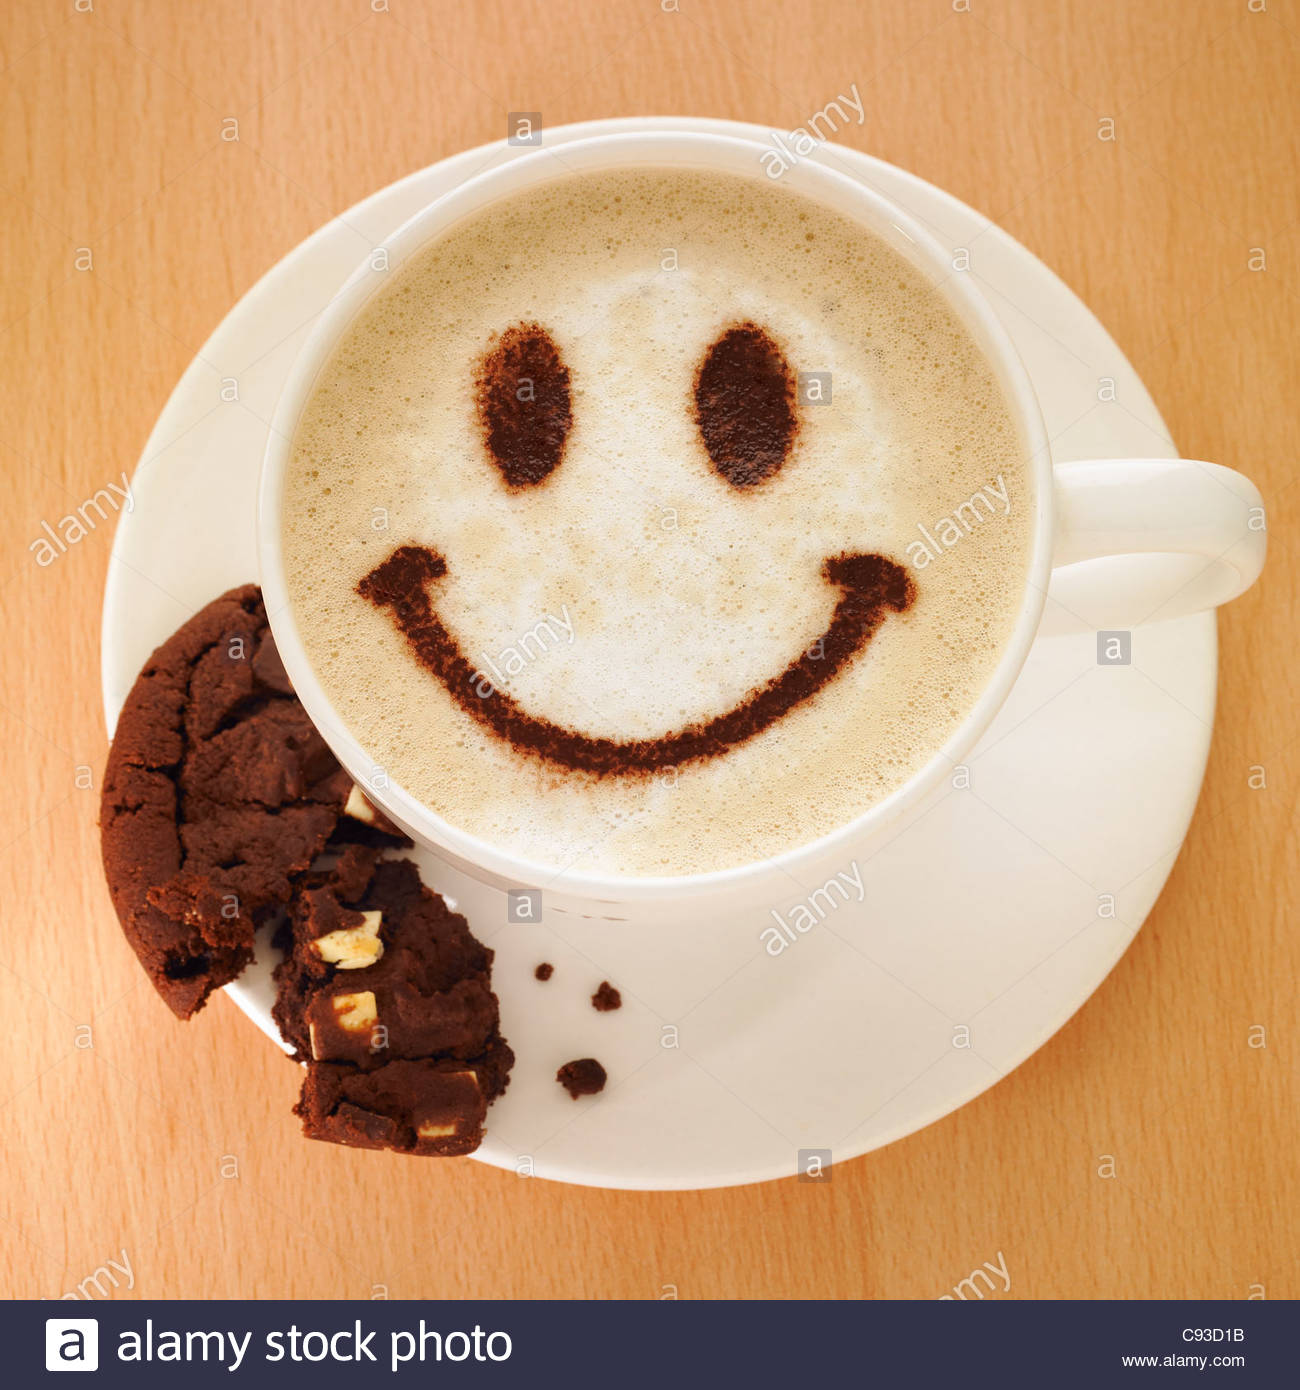 cappuccino-coffee-with-smiley-face-in-chocolate-powder-and-a-cookie-C93D1B.jpg